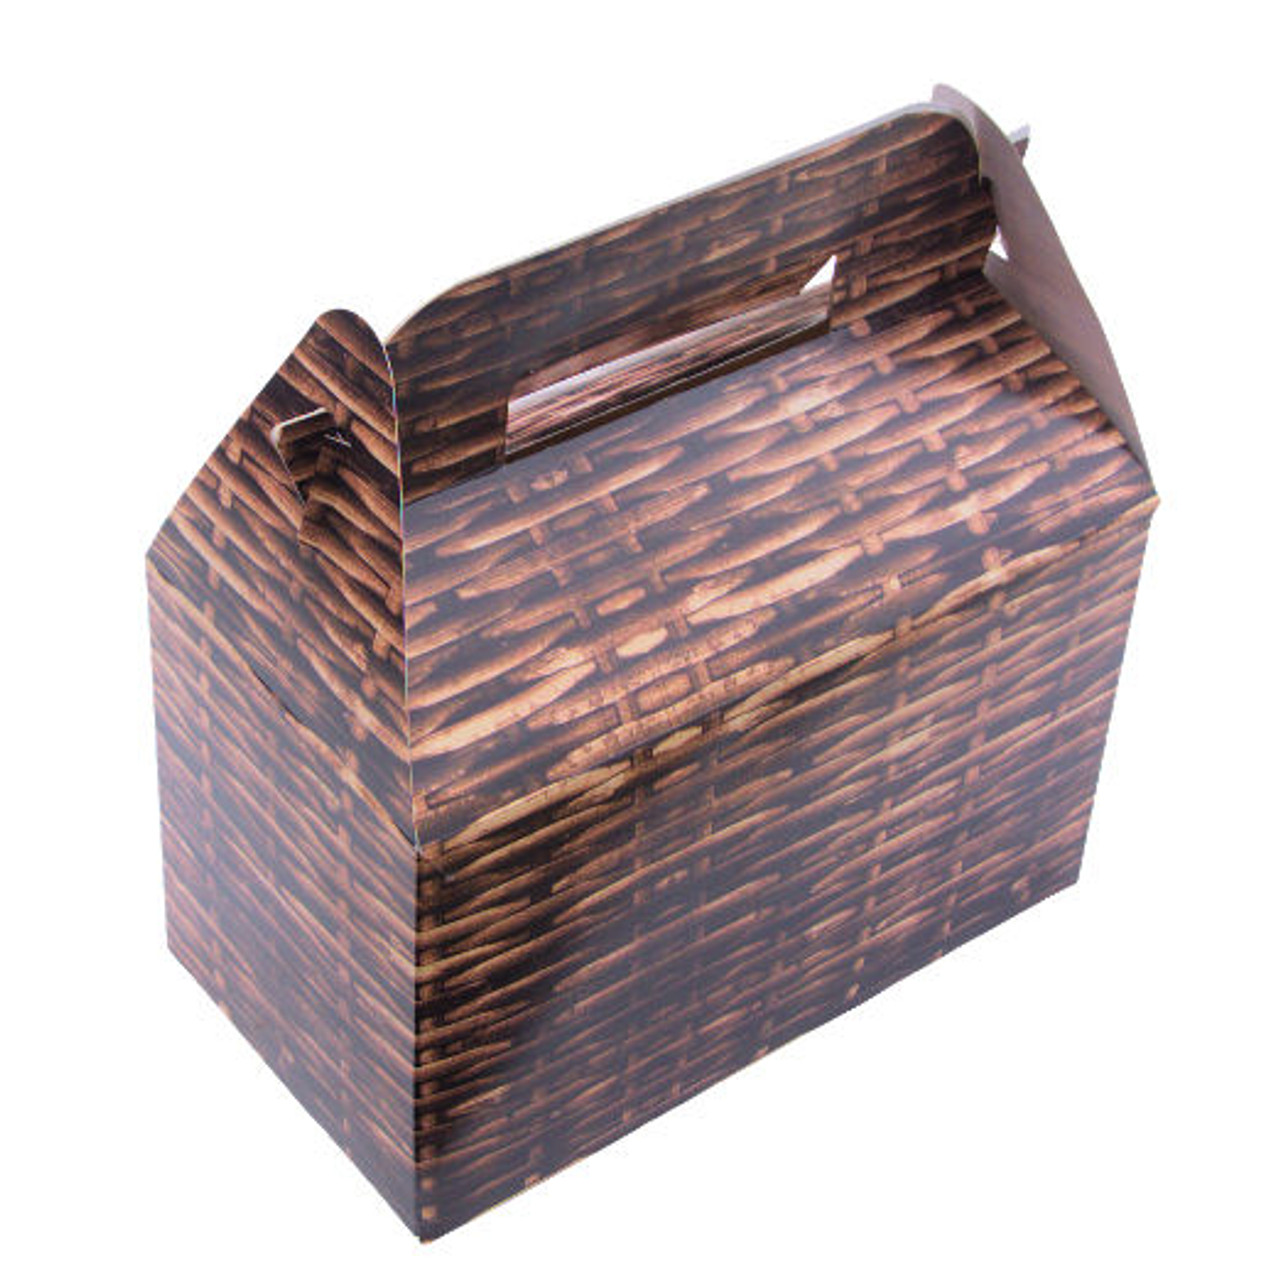 Sample Pack of 1 Food Carry Picnic / Takeaway boxes  WICKER DESIGN includes Sandwich / Cake boxes,